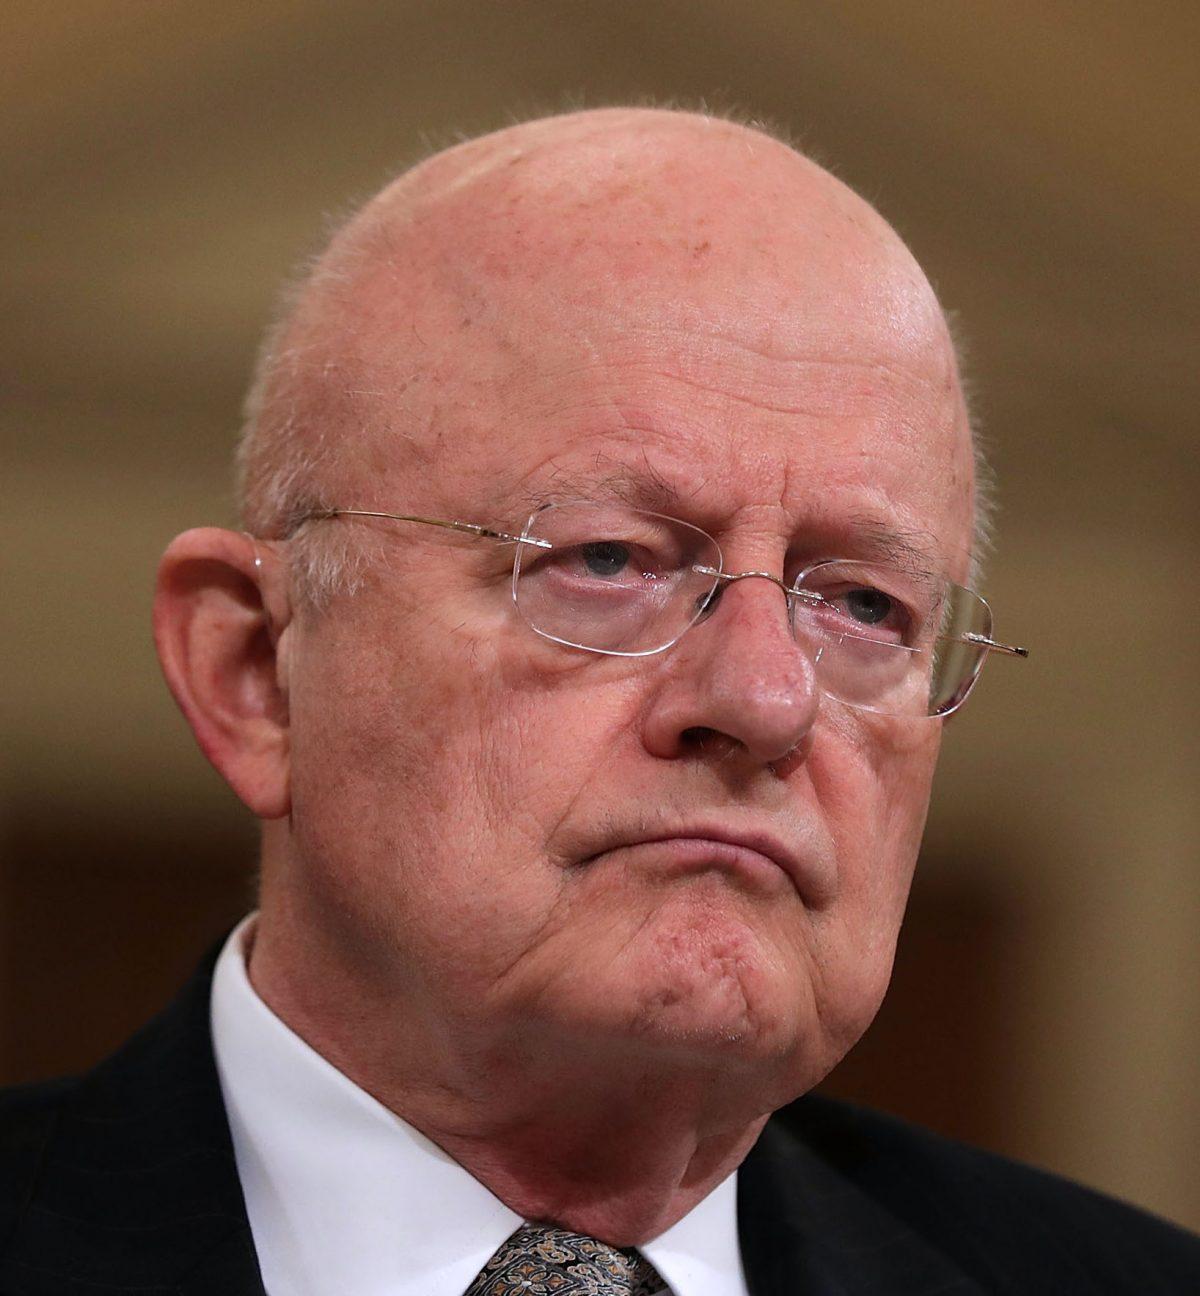 Director of National Intelligence James Clapper. (Alex Wong/Getty Images)